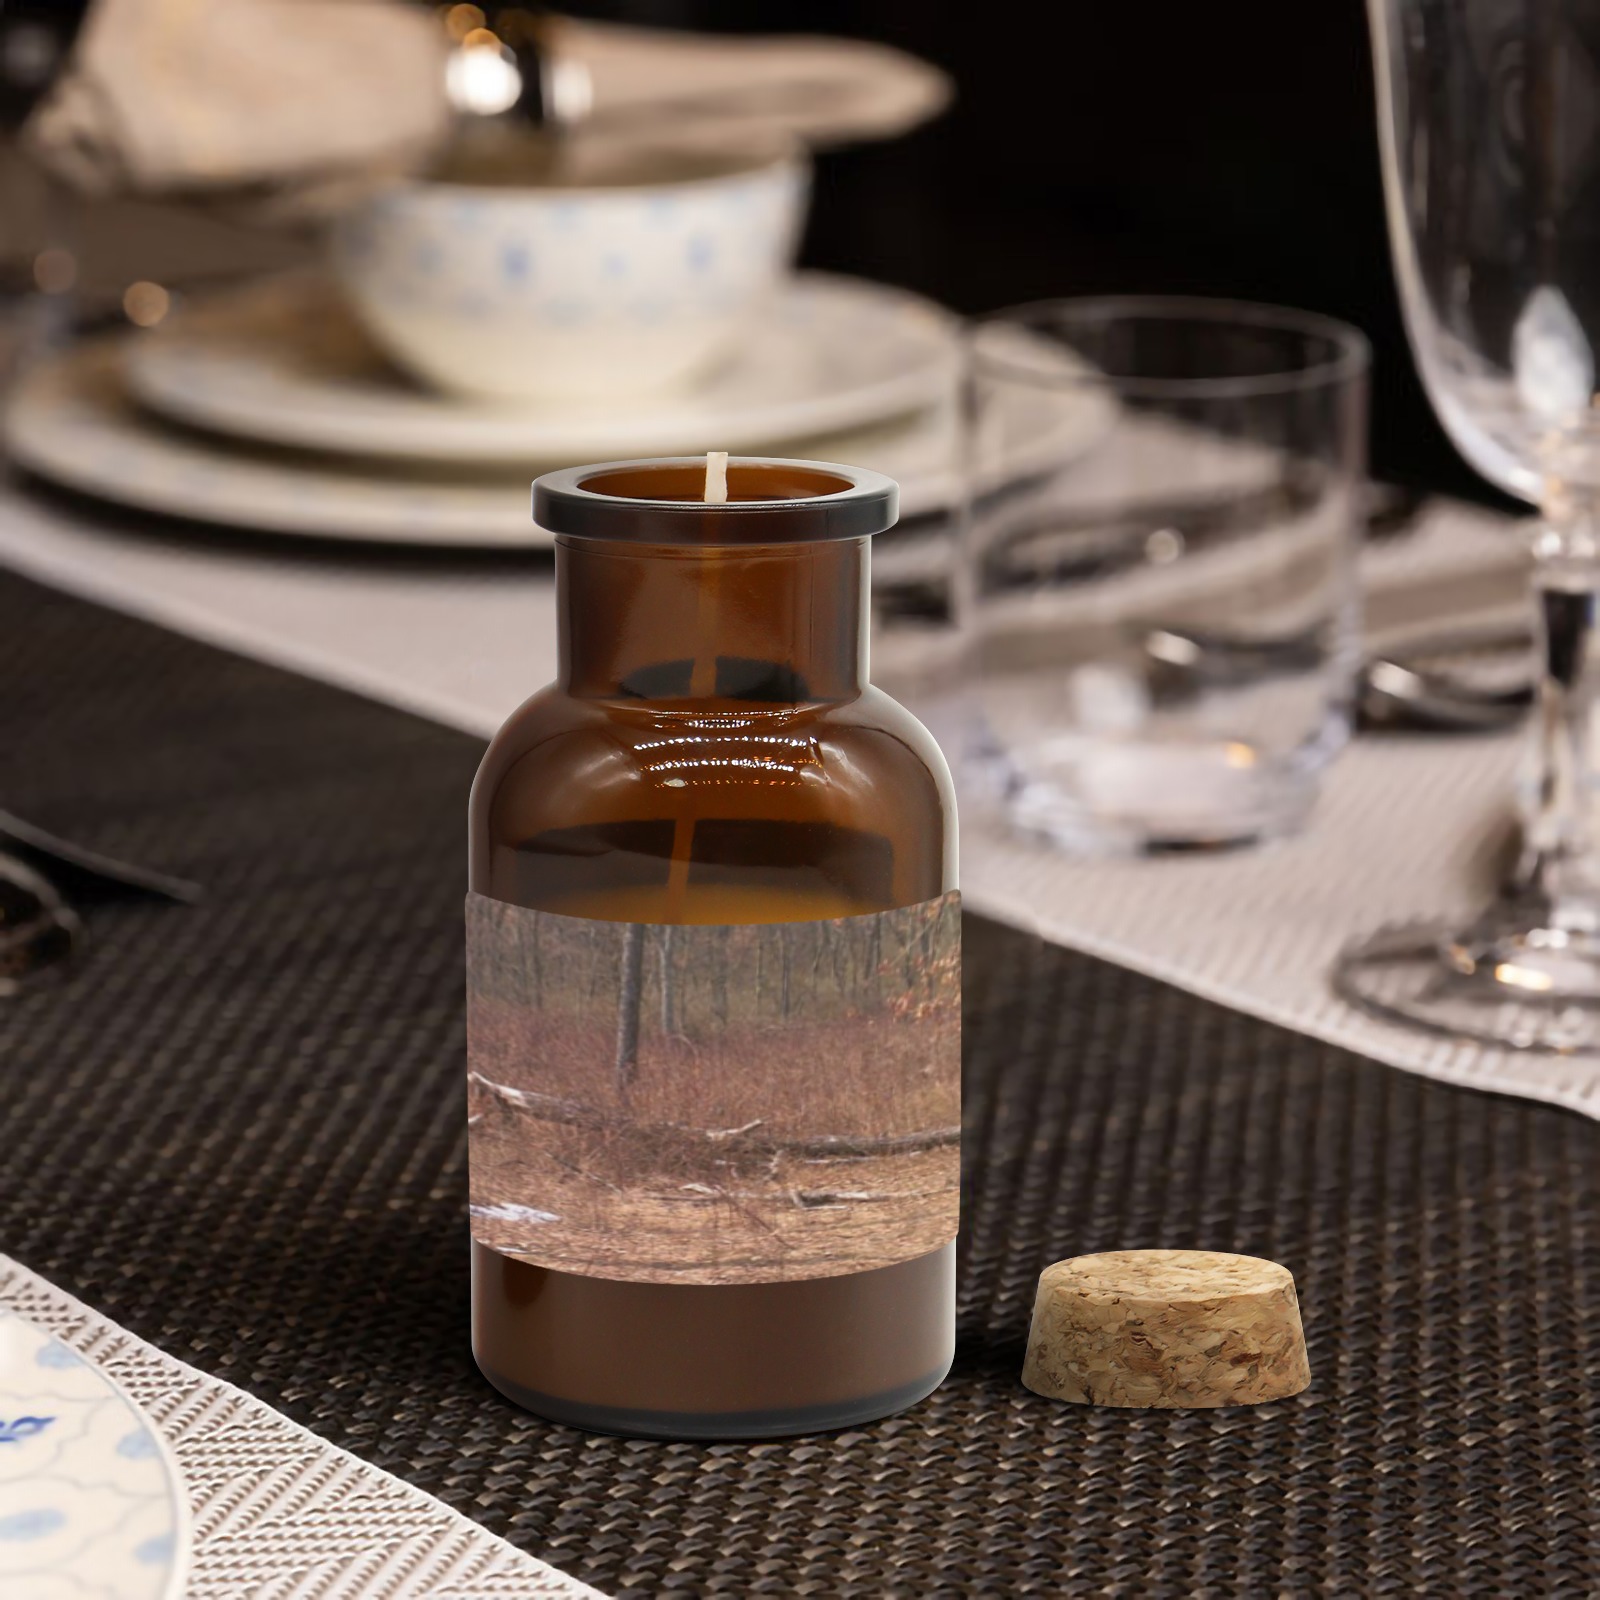 Falling tree in the woods Tawny Medicine Bottle Candle Cup (Rose Sandal)